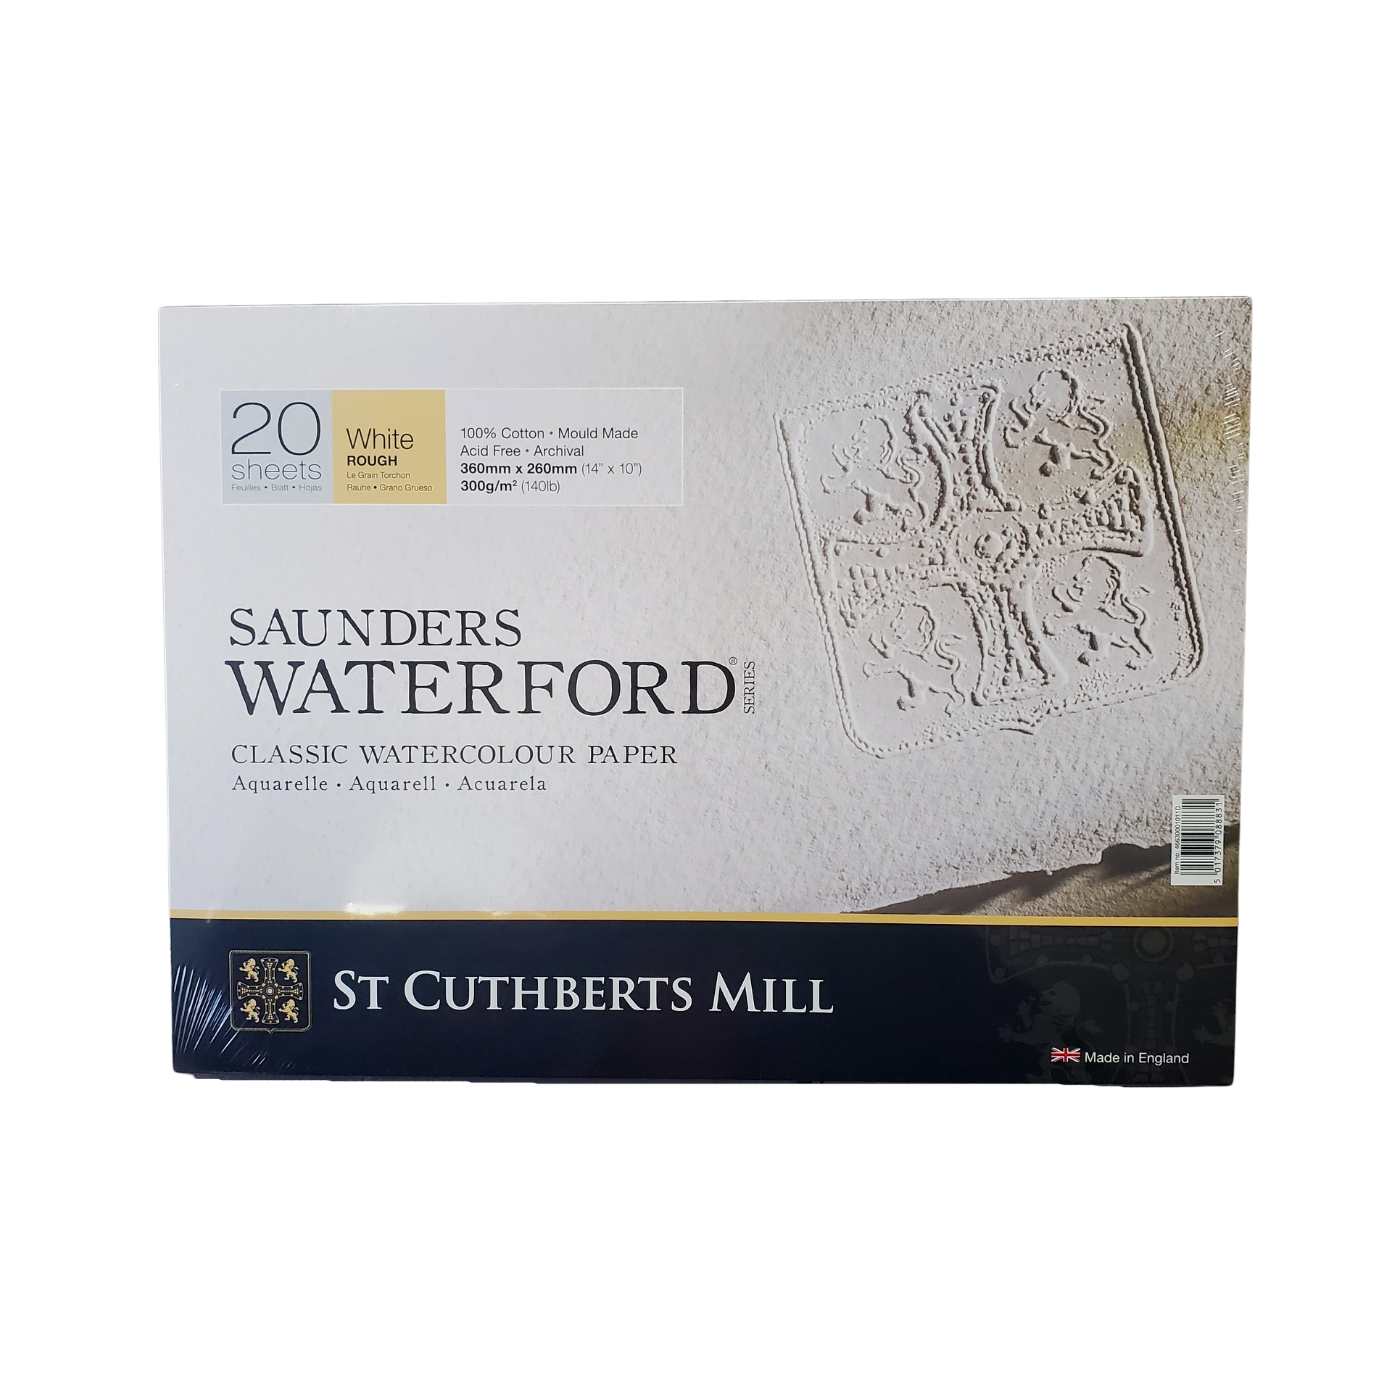 St. Cuthberts Mill Saunders Waterford Watercolor Paper Block - 12x9-inch  White 100% Cotton Watercolor Paper - 20 Sheets of 140lb Hot Press  Watercolor